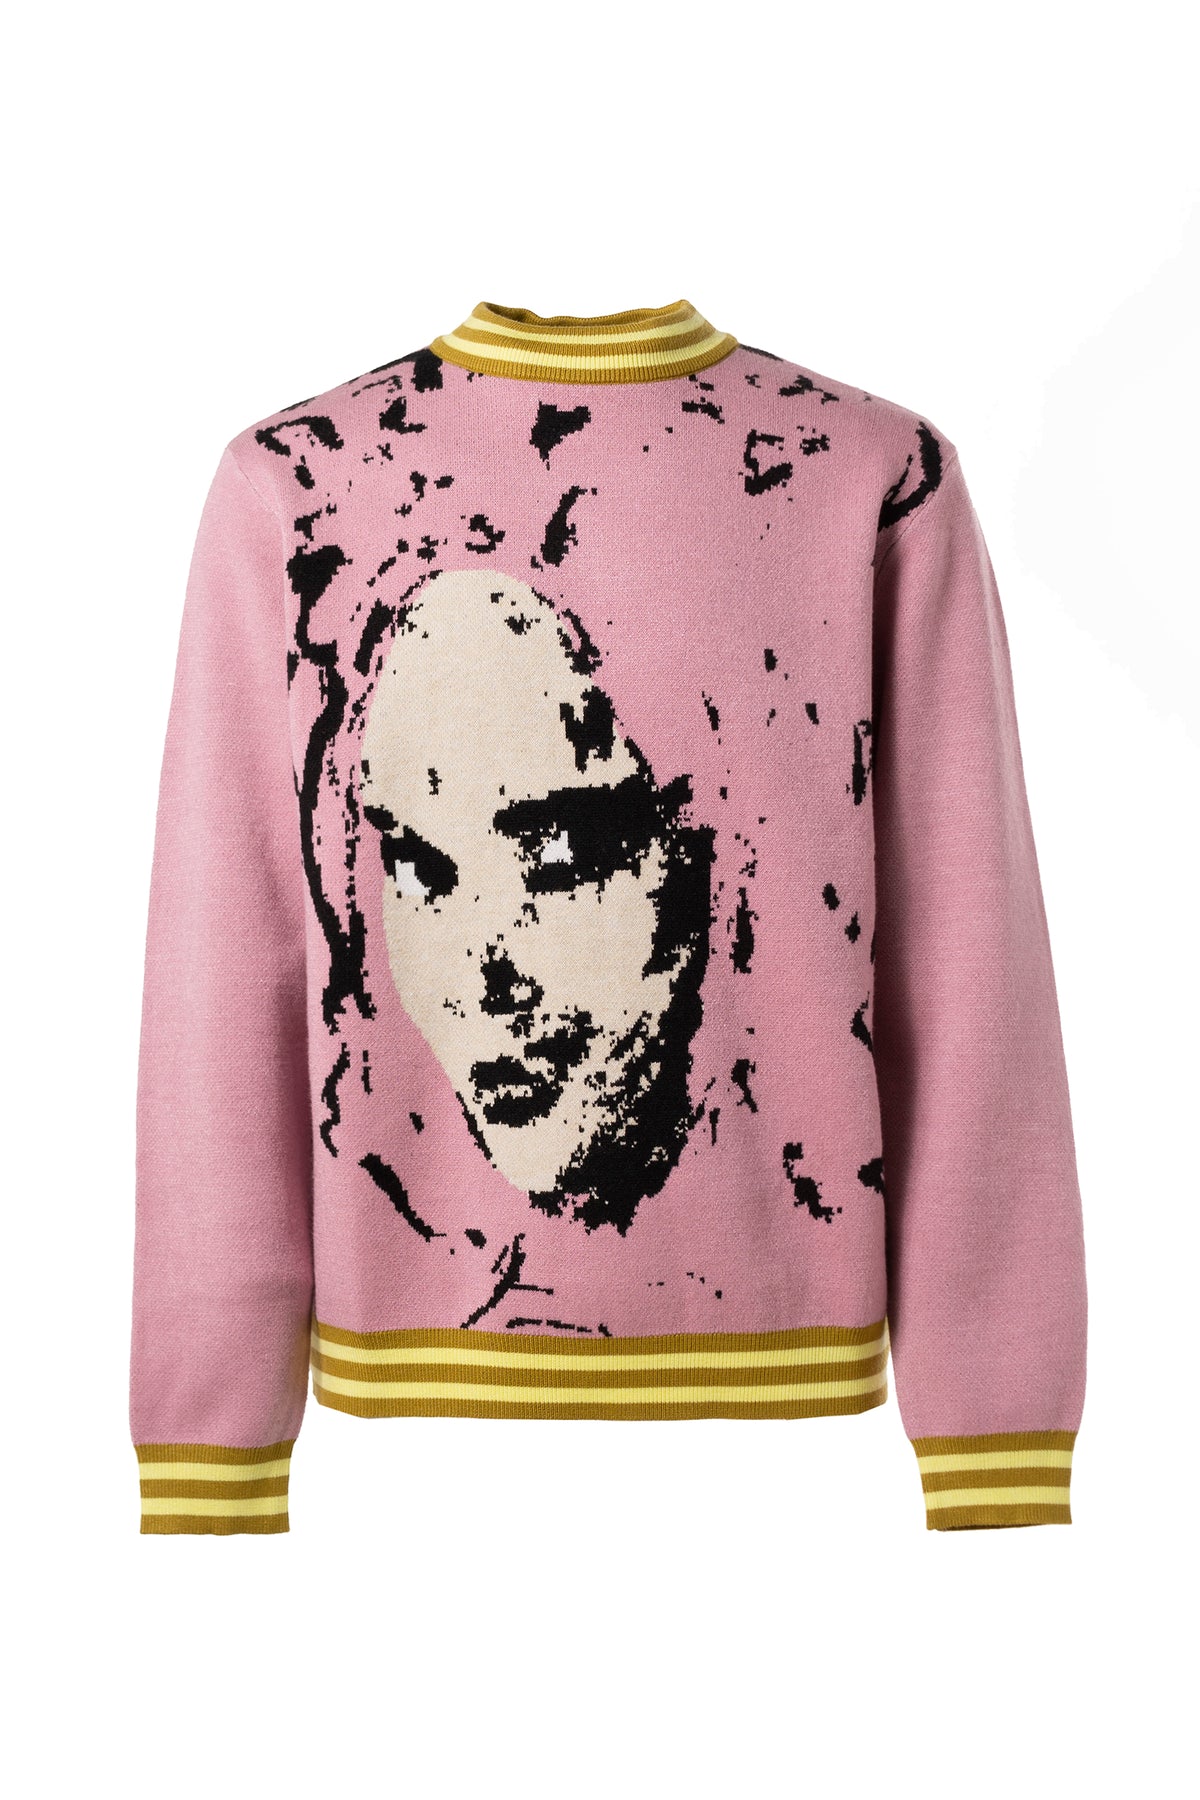 THE CON ARTIST SWEATER / PINK